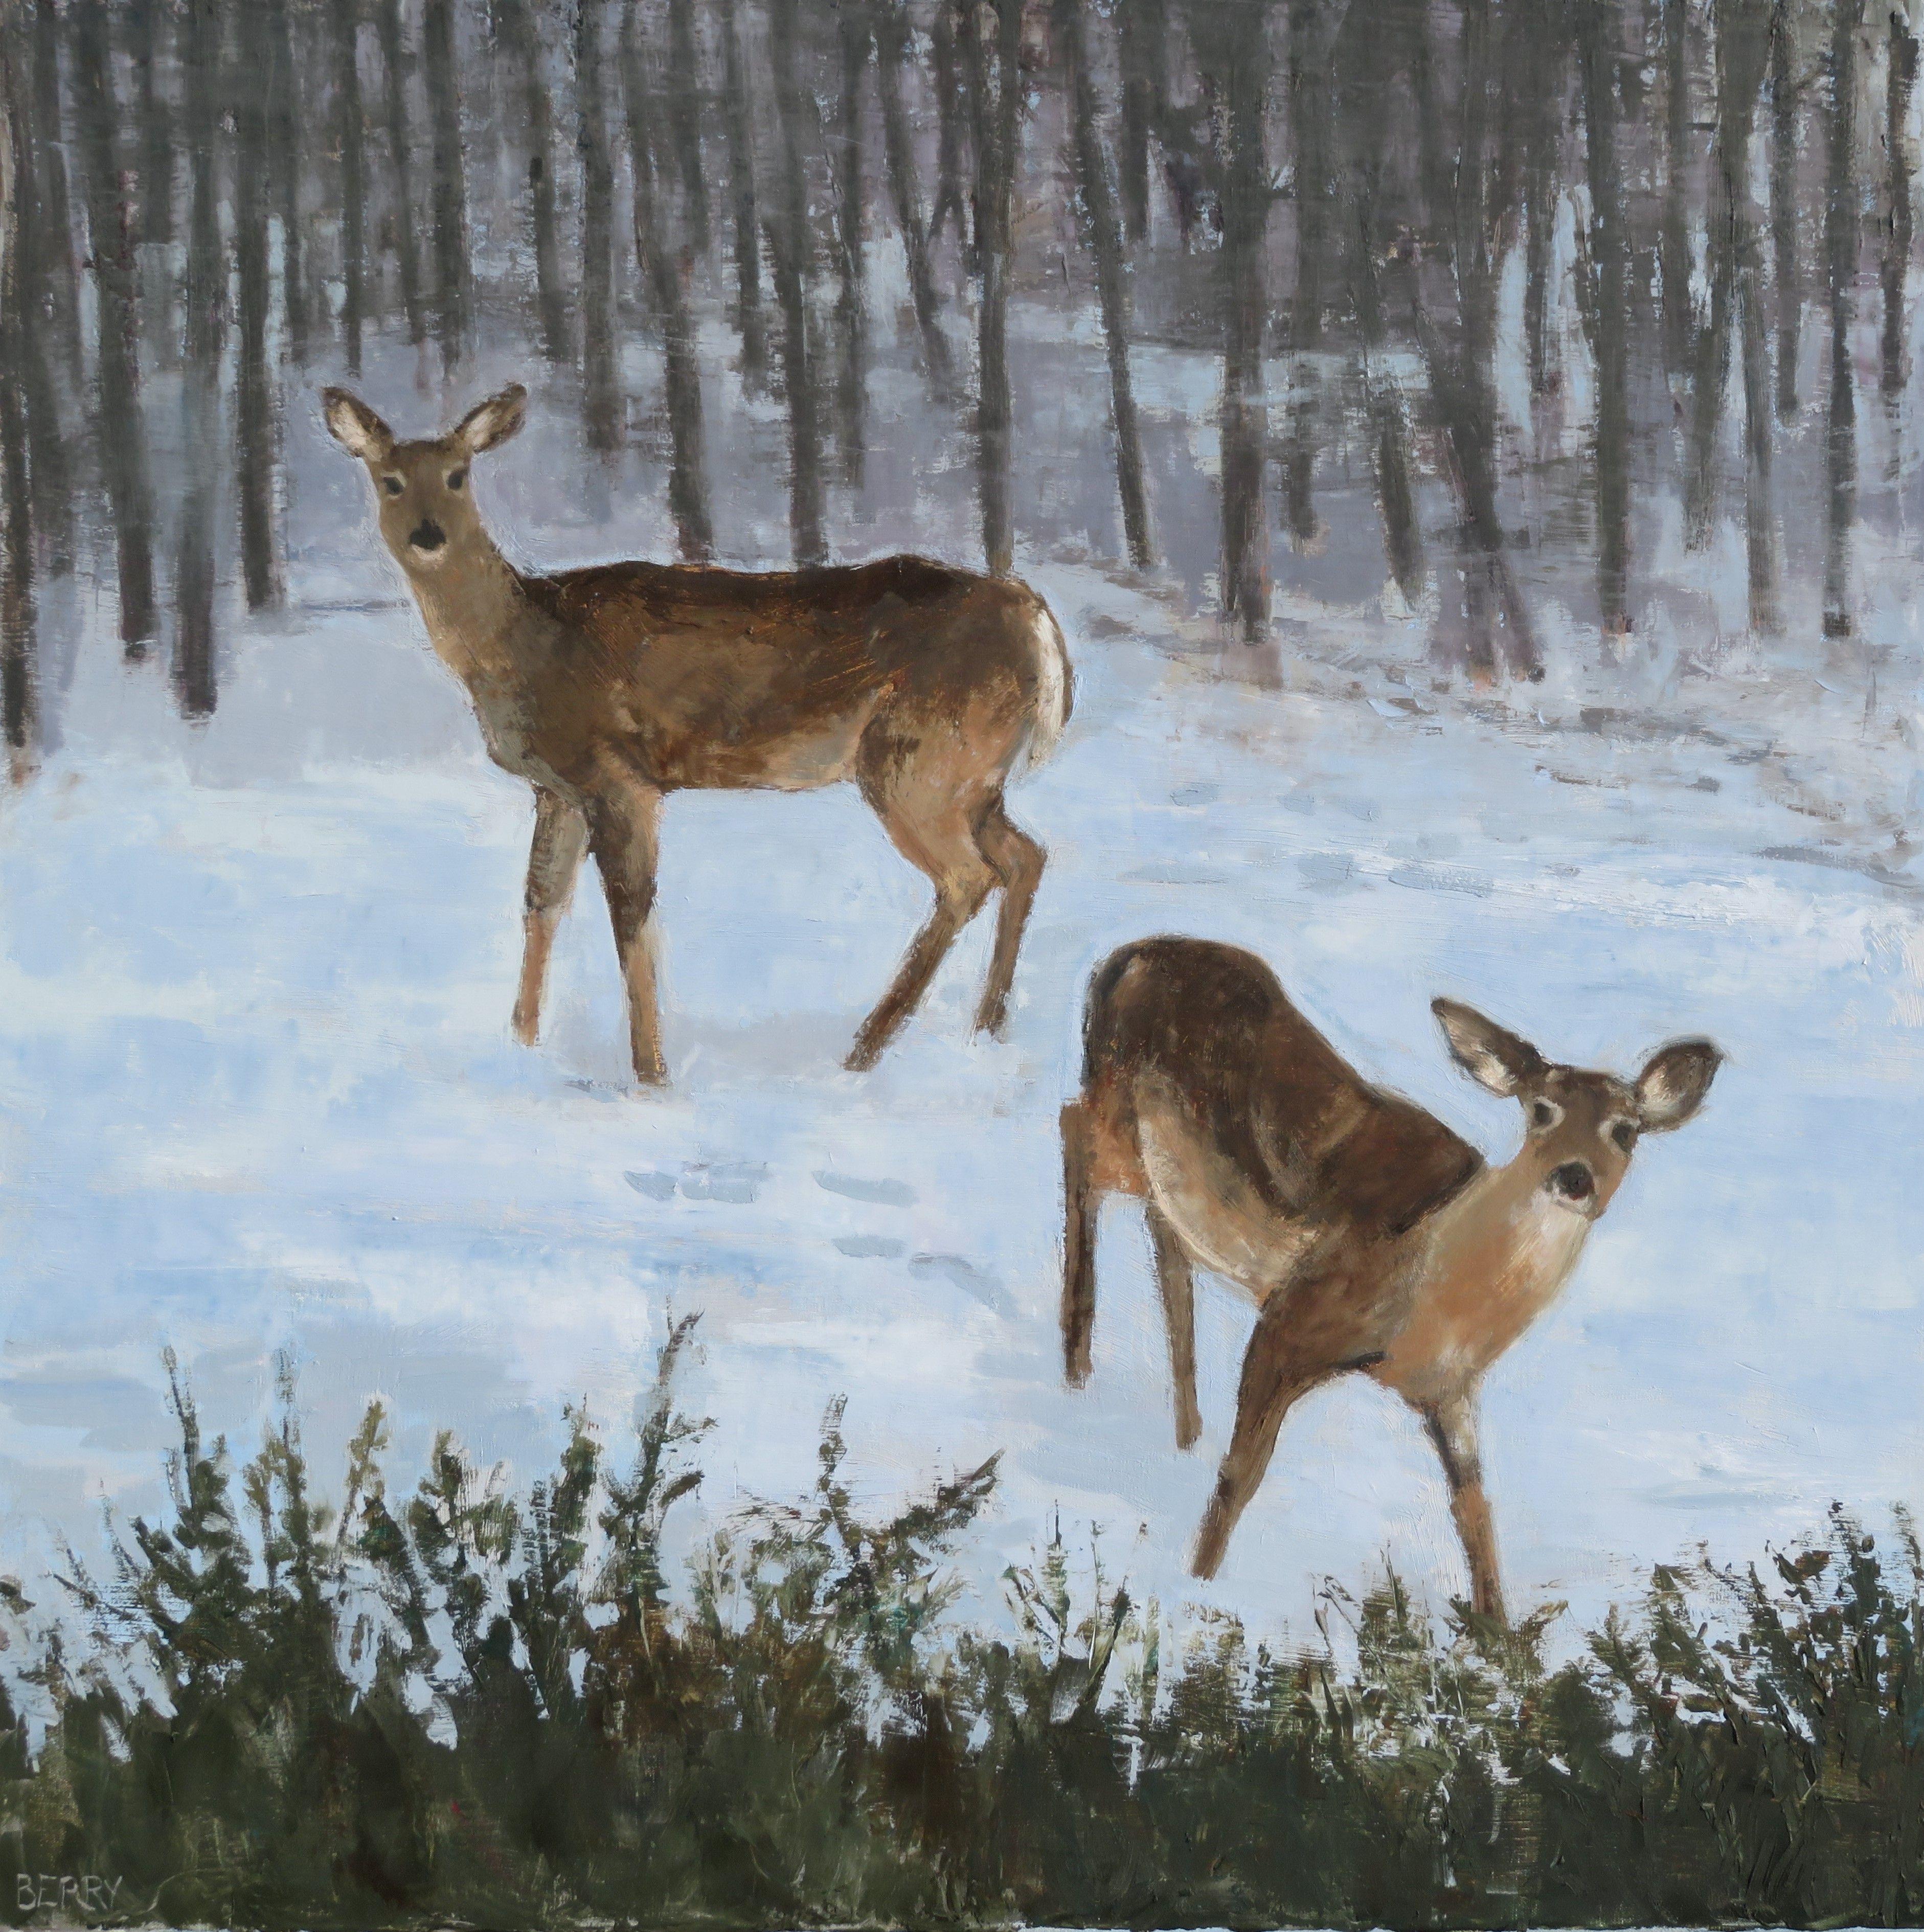 The winter buffet for the neighborhood deer includes our yew bush.  Who knew it would be tasty?  This was painted with quality oil paints and cold wax on linen.  The edges are painted and it may be hung without a frame. :: Painting :: Contemporary